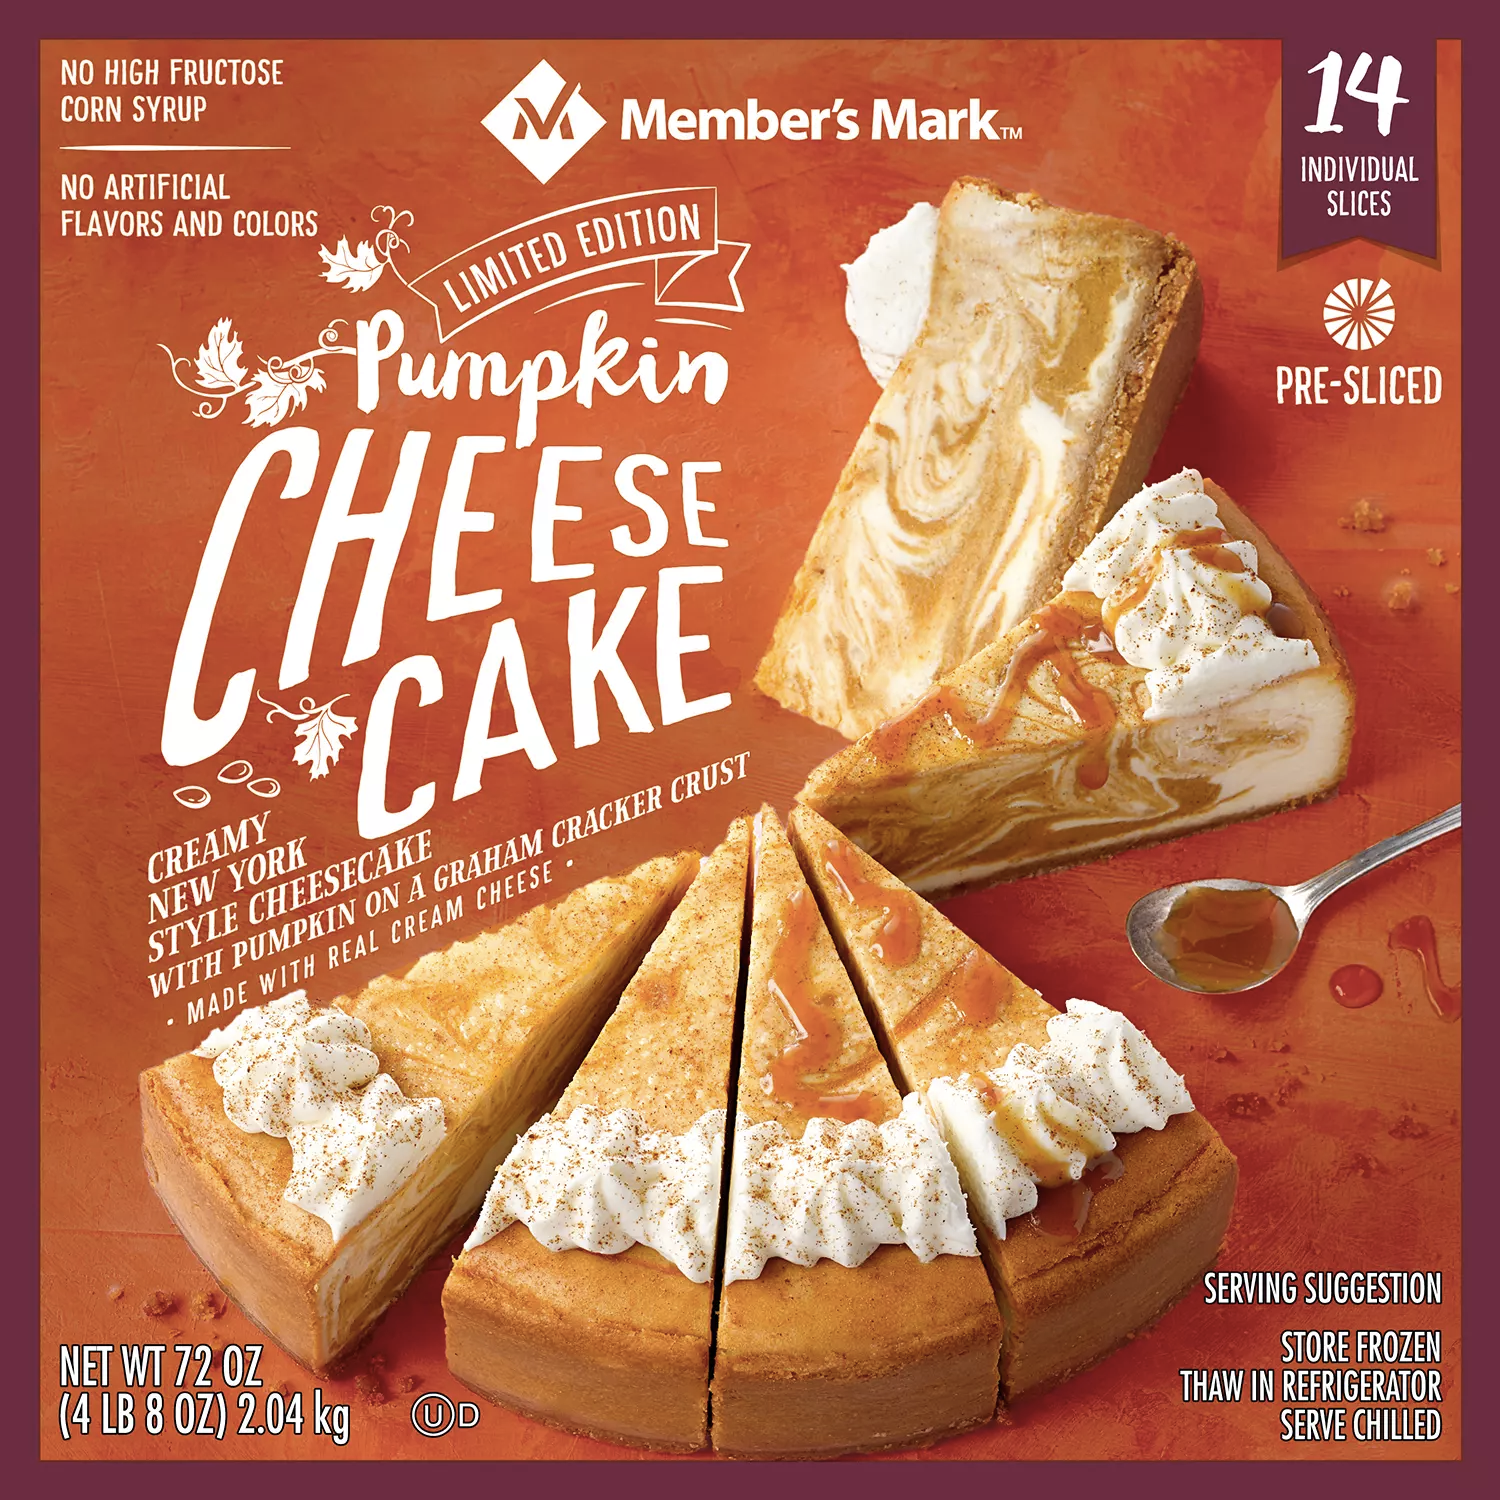 The packaging for pumpkin cheesecake 